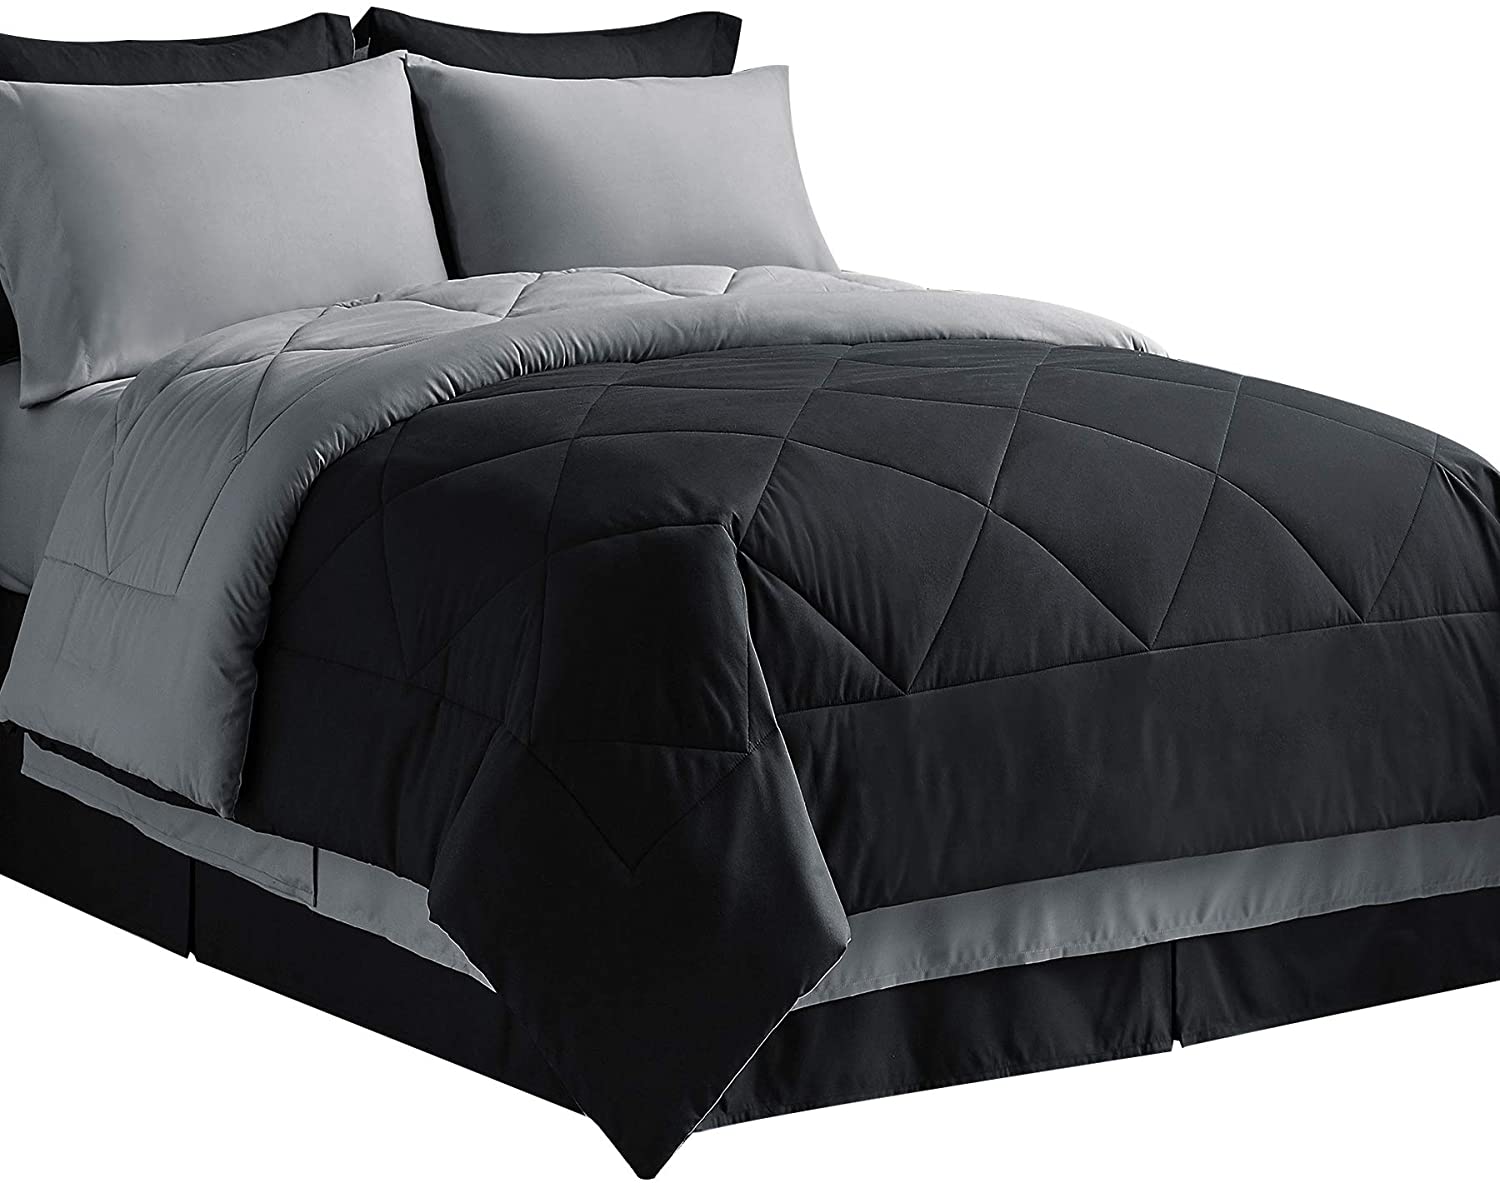 Bedsure Bed In A Bag Comforter Sets, Gray Twin Bed Comforter